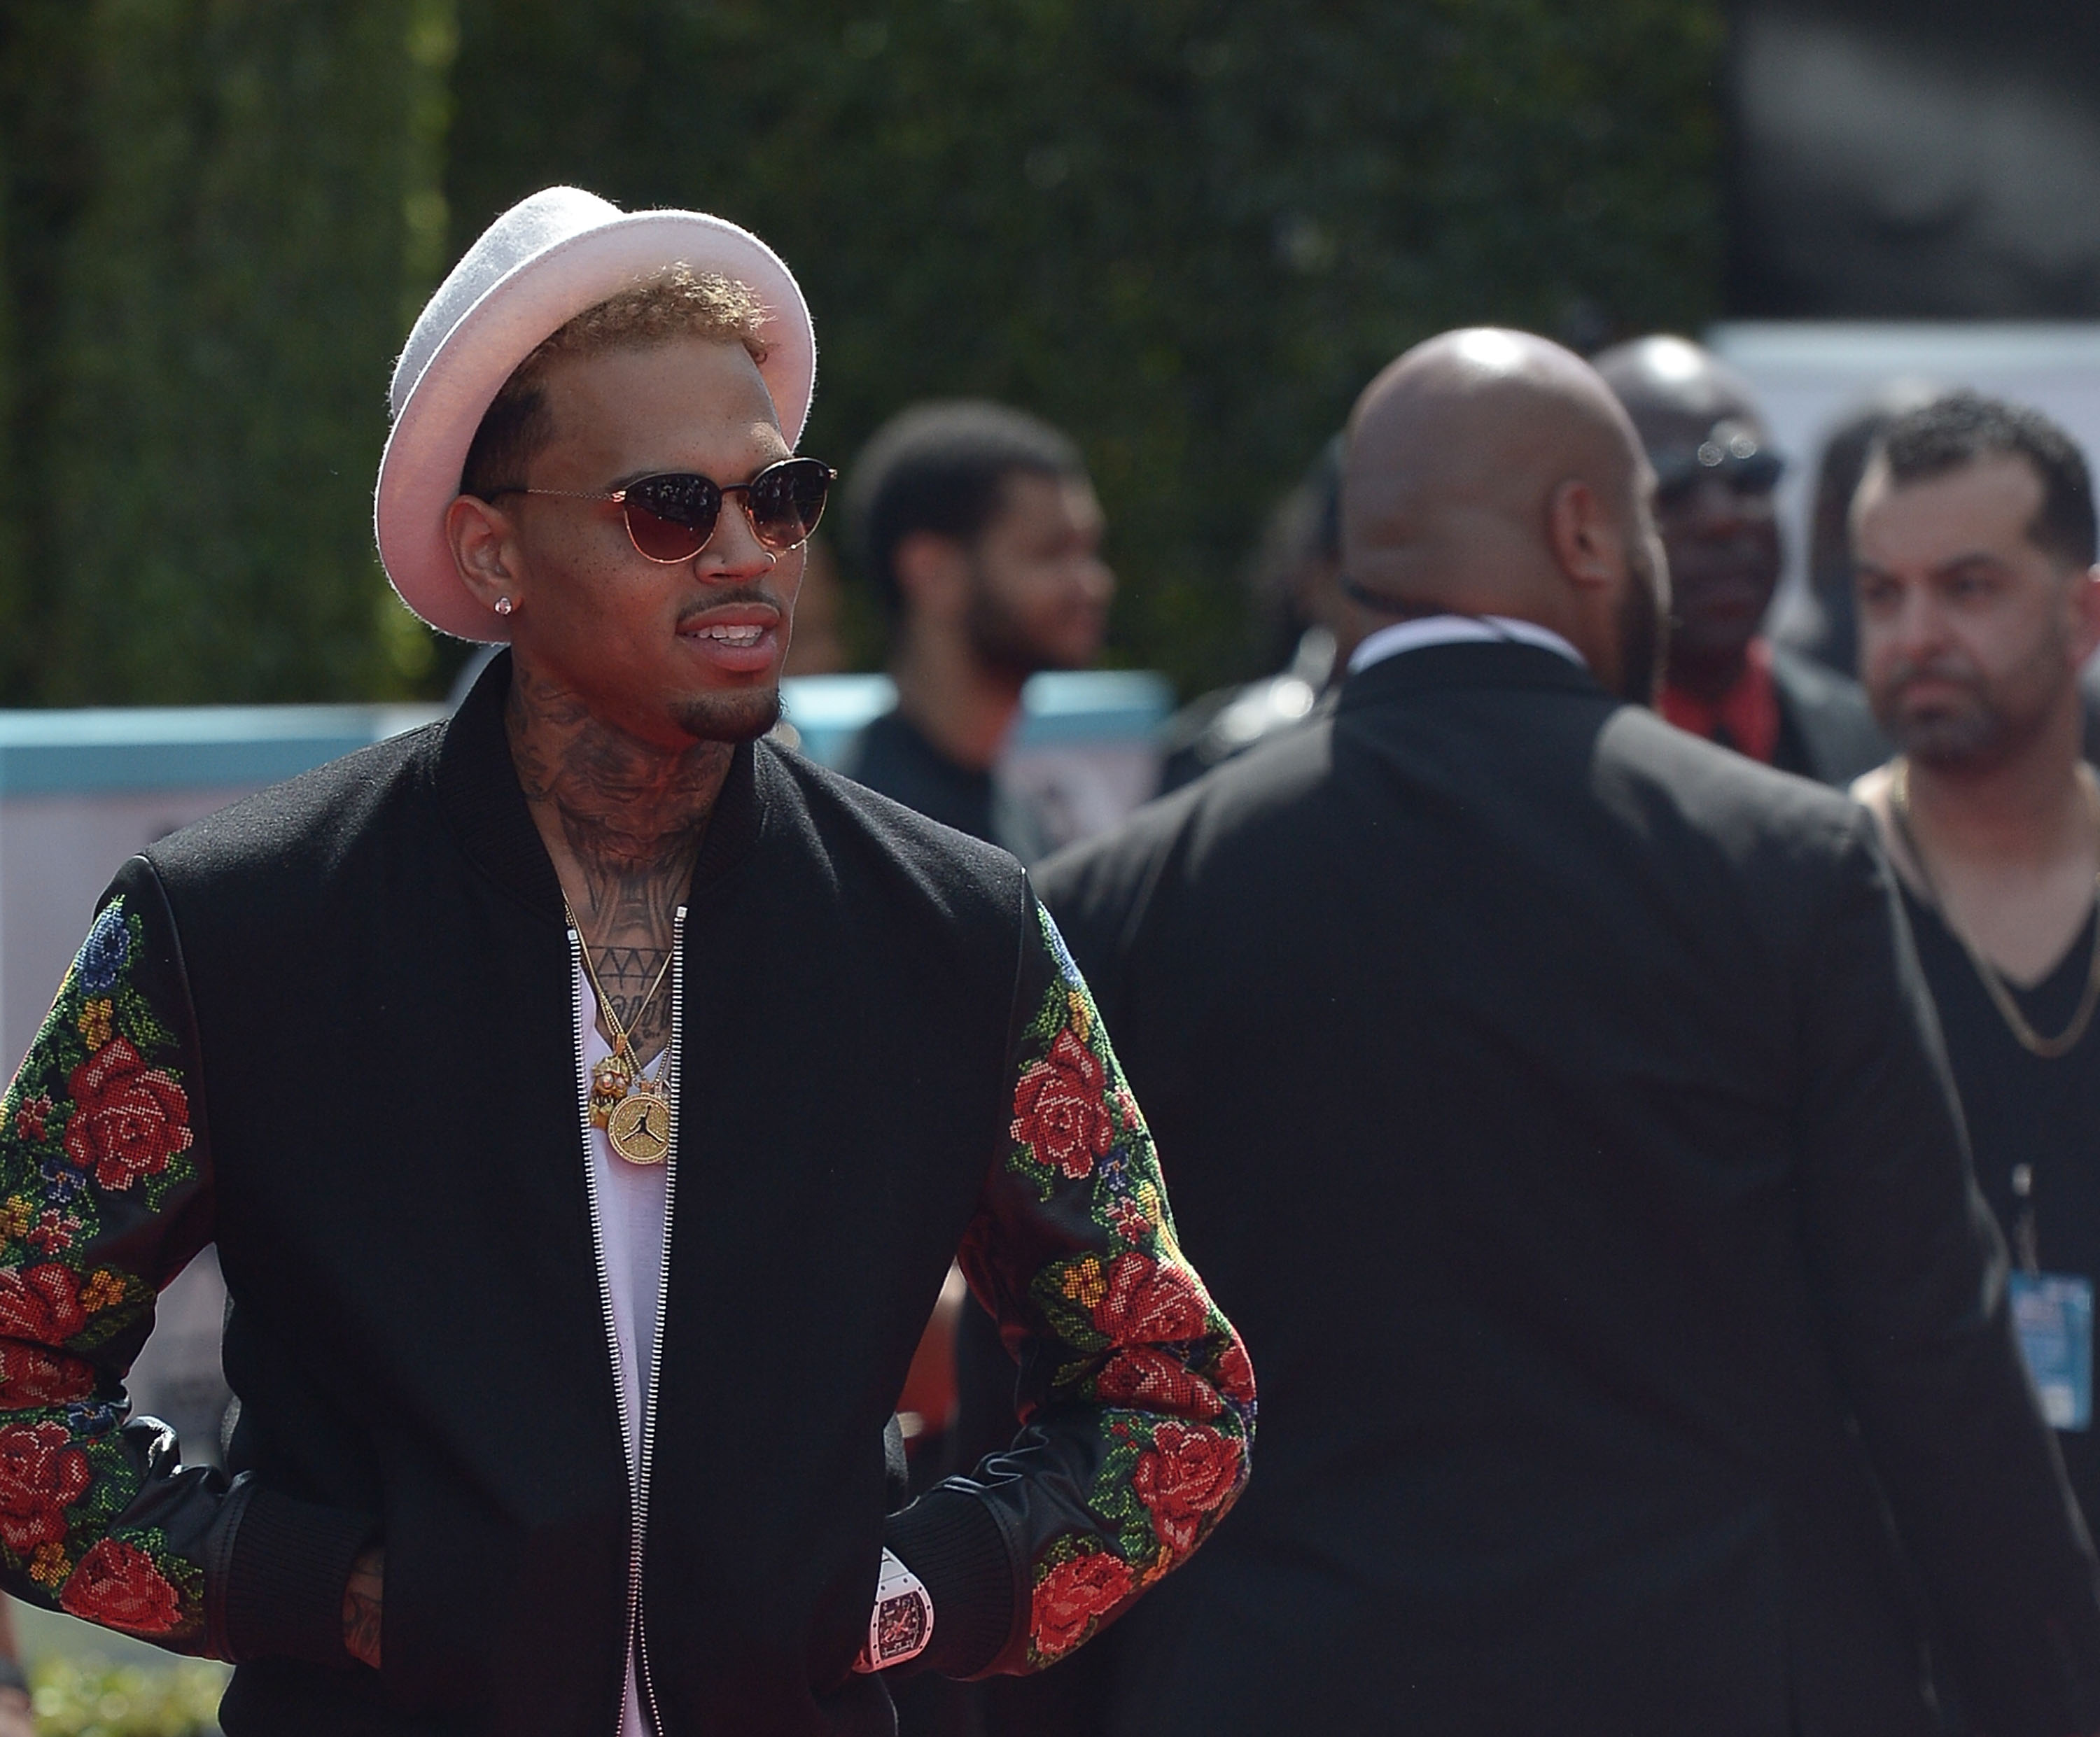 Singer Chris Brown attends the 2015 BET Awards at the Microsoft Theater on June 28, 2015 in Los Angeles, California. (Paras Griffin&mdash;Paras Griffin)